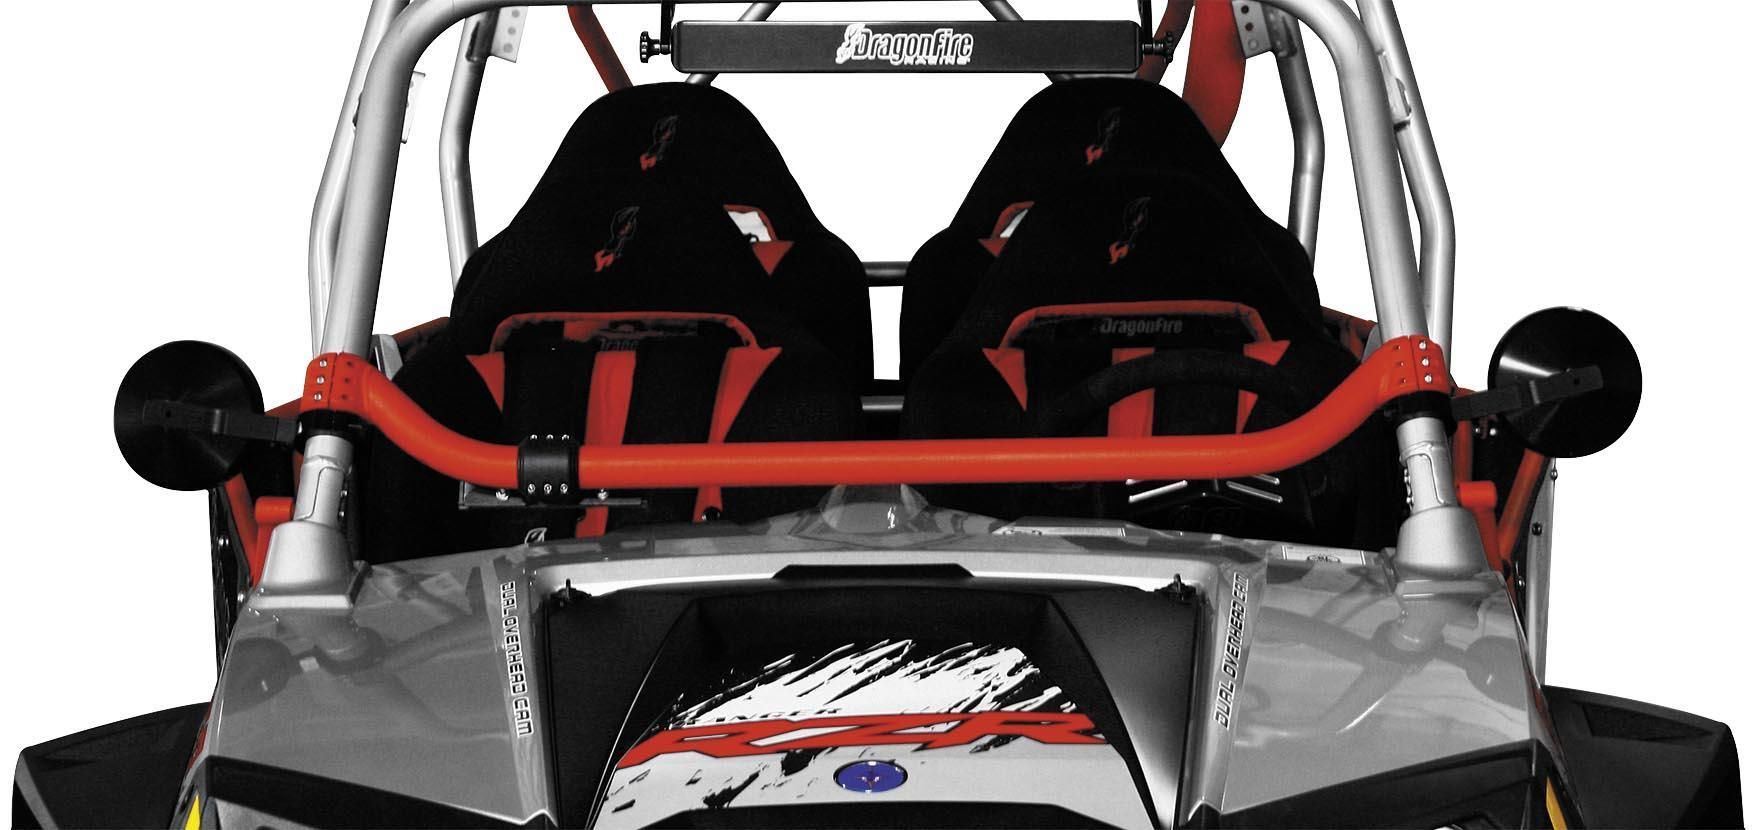 4LZS-DRAGONFIRE-02-1002 Rocksolid Front Dash Brace - Red